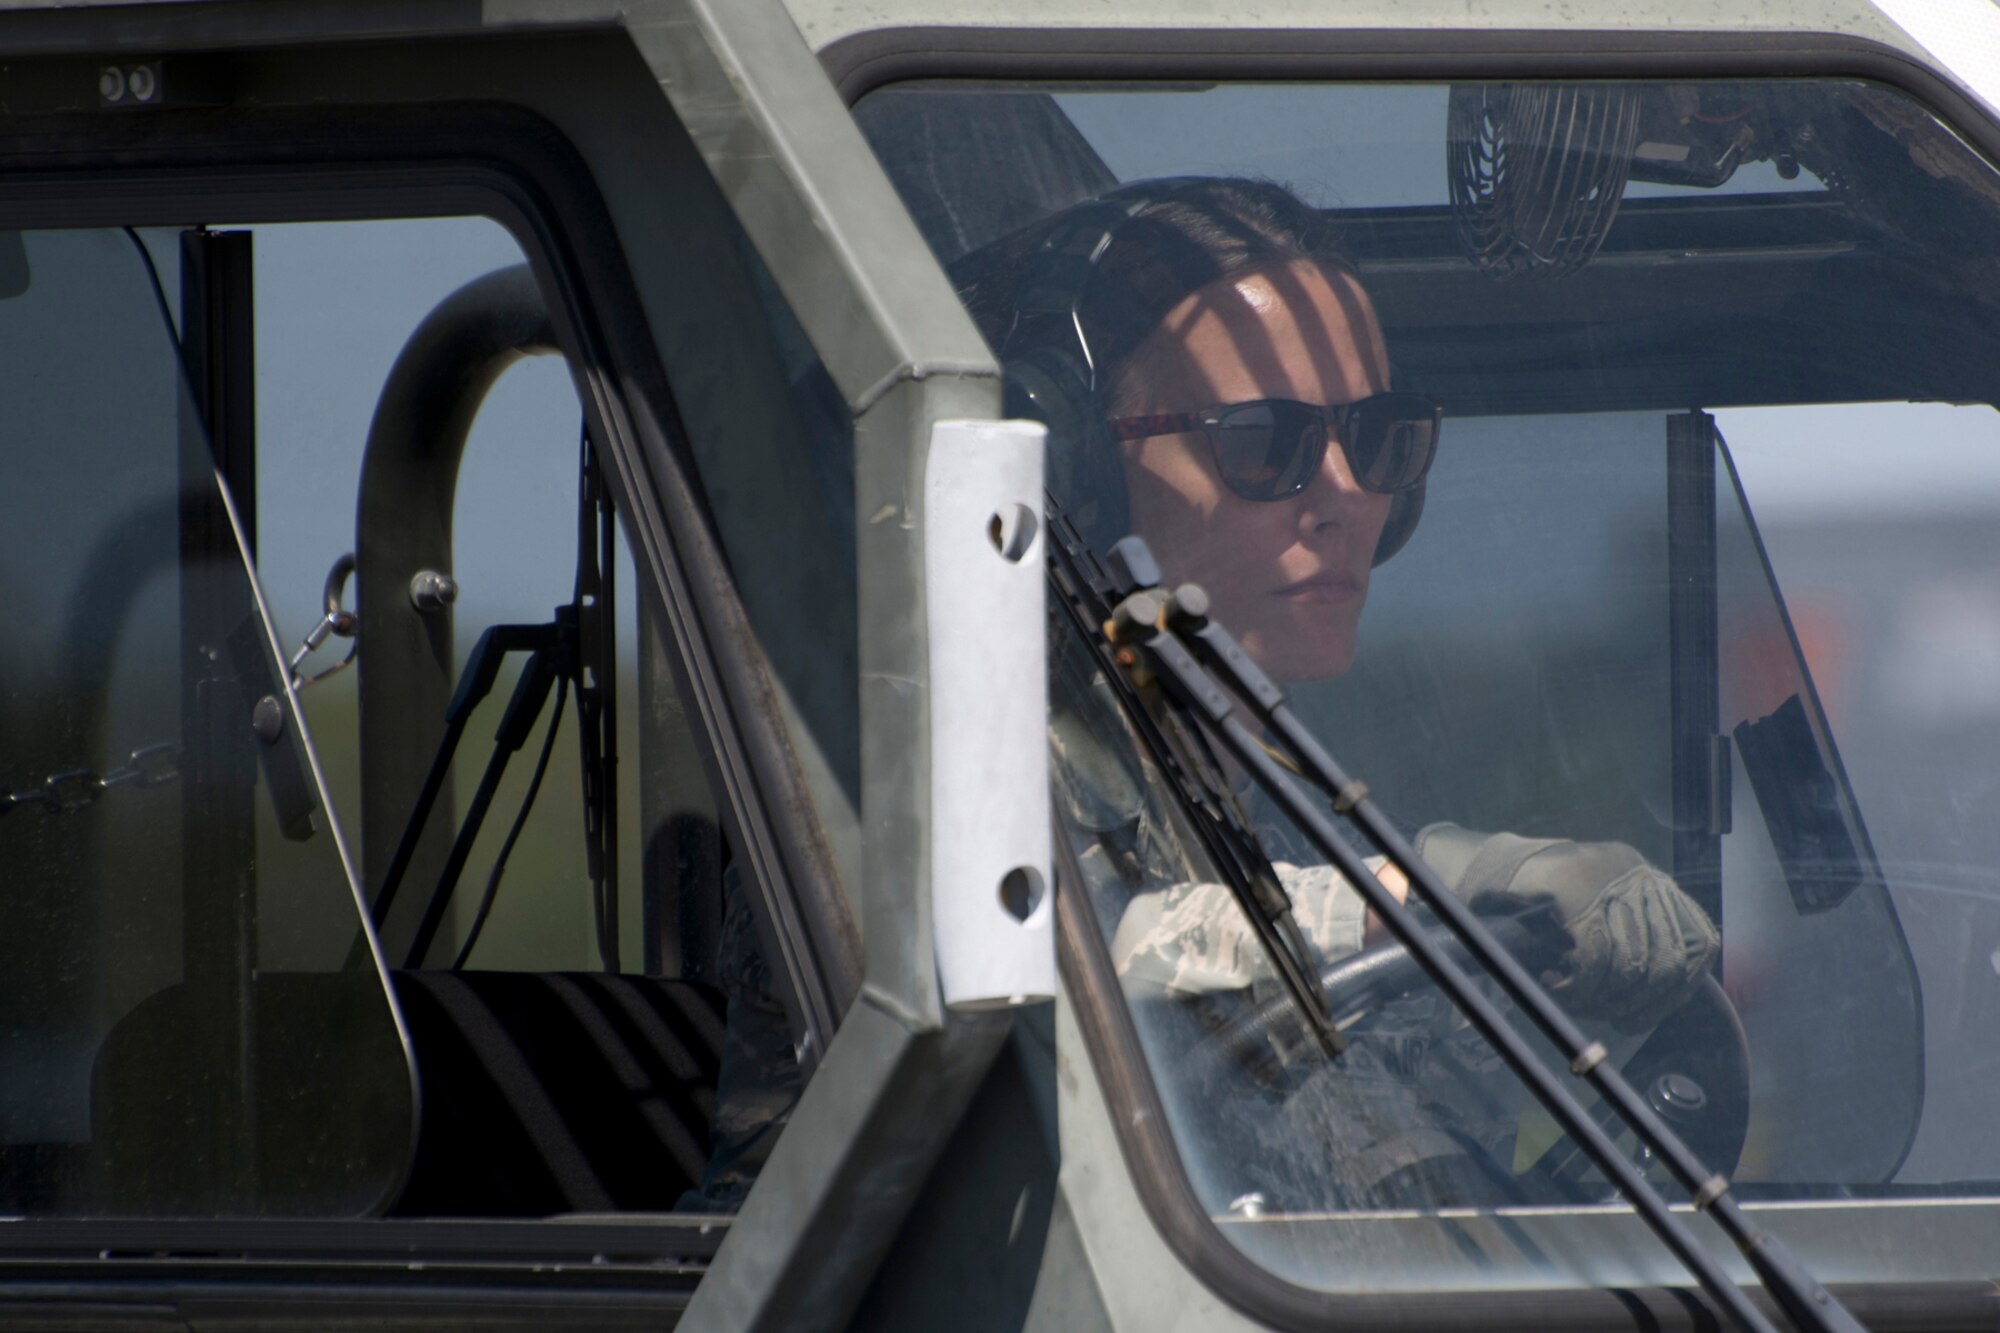 U.S. Air Force Reserve Tech Sgt. Kristen Garrett, air transportation craftsman, 96th Aerial Port Squadron,   practices driving a Halverson 25K Loader during her Unit Training Assembly weekend April 1, 2017, at Little Rock Air Force Base, Ark. Garrett is preparing to compete in the 2017 Port Dawg Challenge for air mobility professionals at Dobbins Air Reserve Base, Ga. (U.S. Air Force photo by Master Sgt. Jeff Walston/Released)